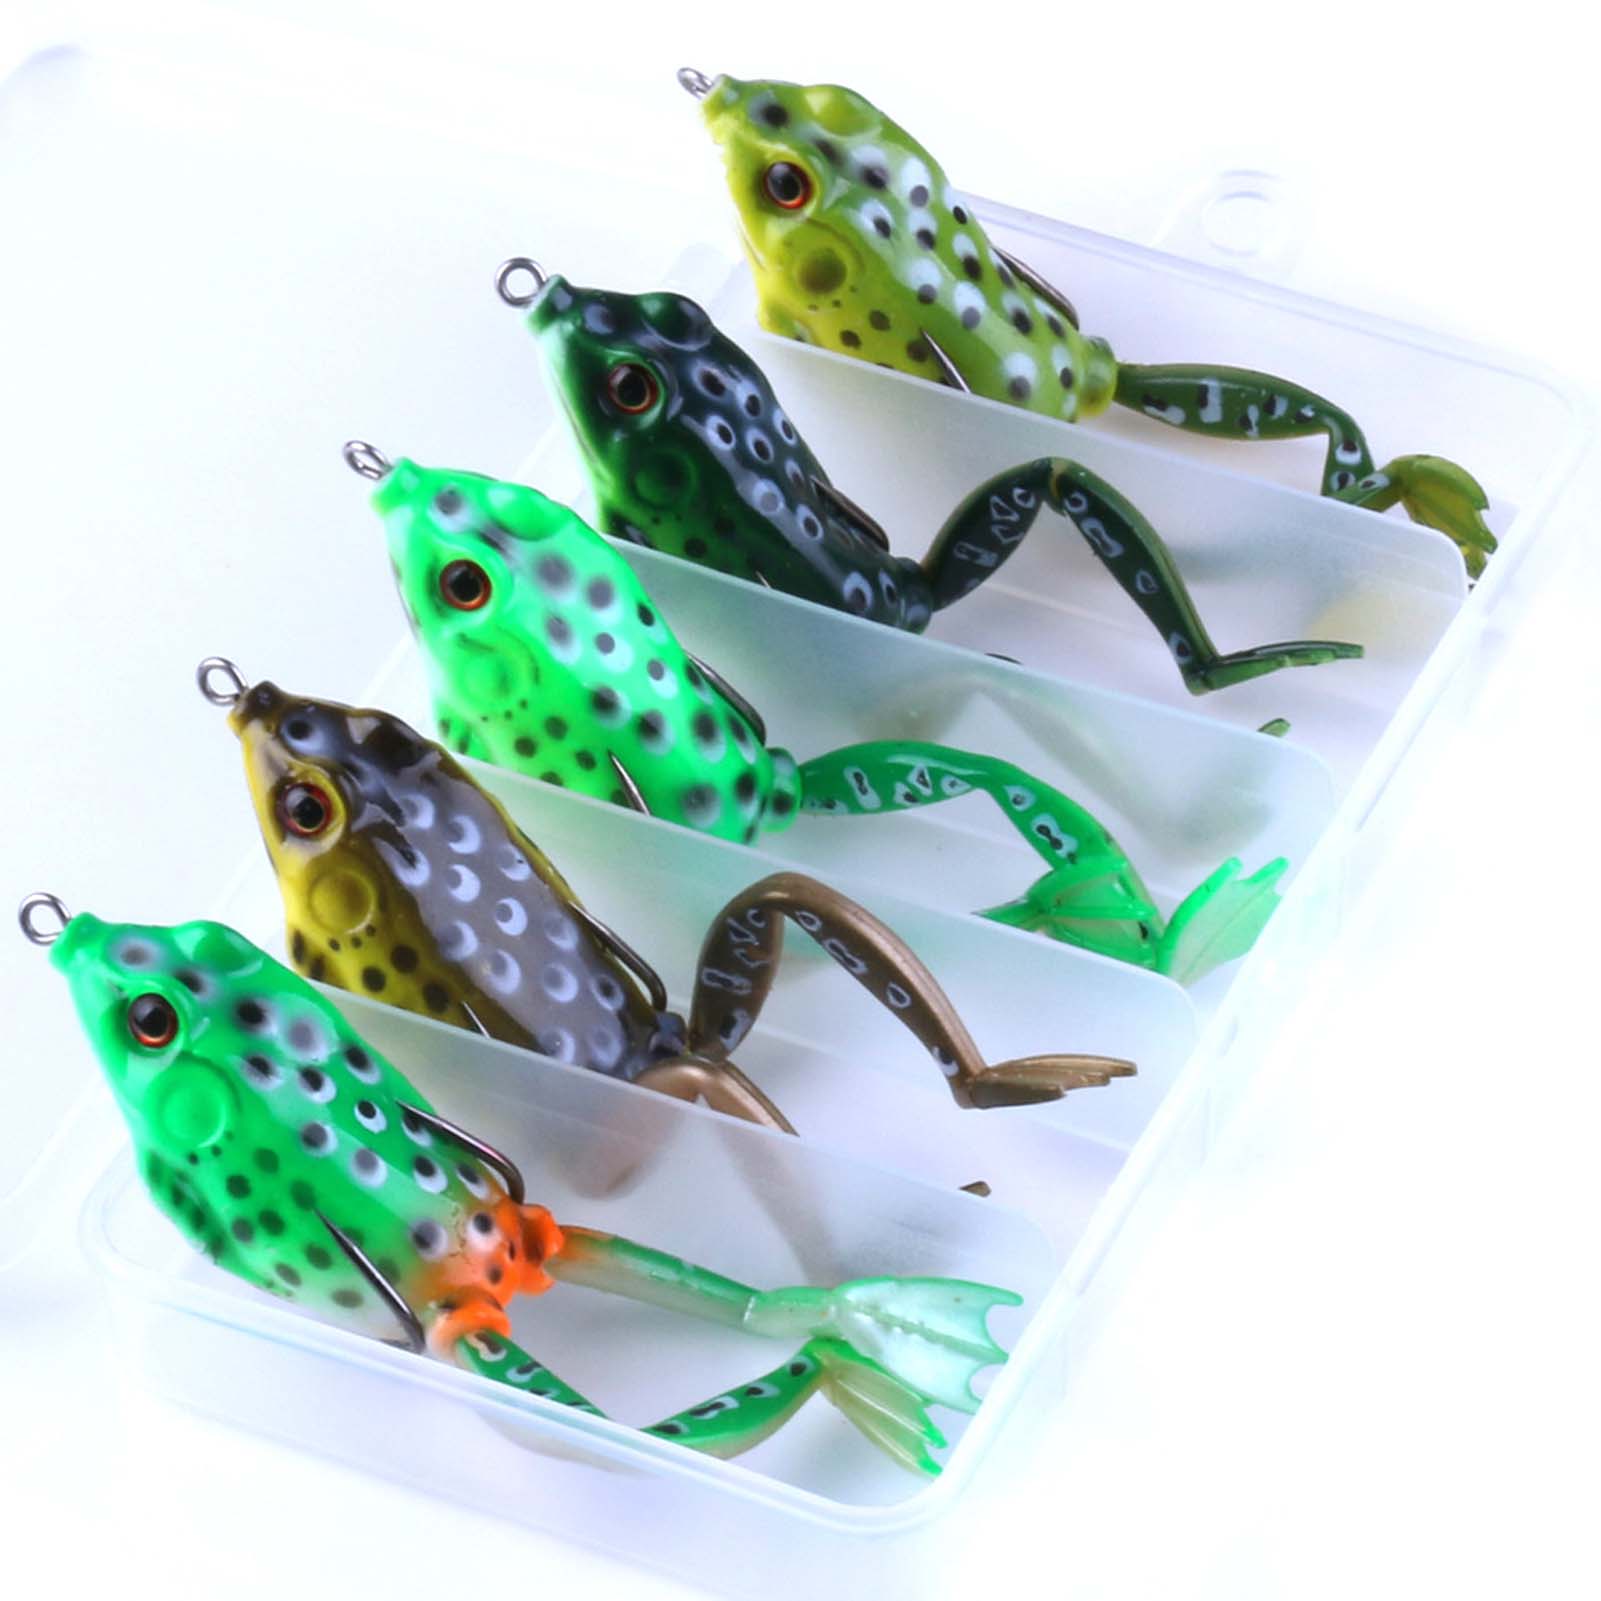 FREE FISHER 5pcs Fishing Frogs Set Soft Baits Snakehead Lure Topwater Simulation Thunder Frogs Lures with 5 Grids Plastic Box for Bass/Pike